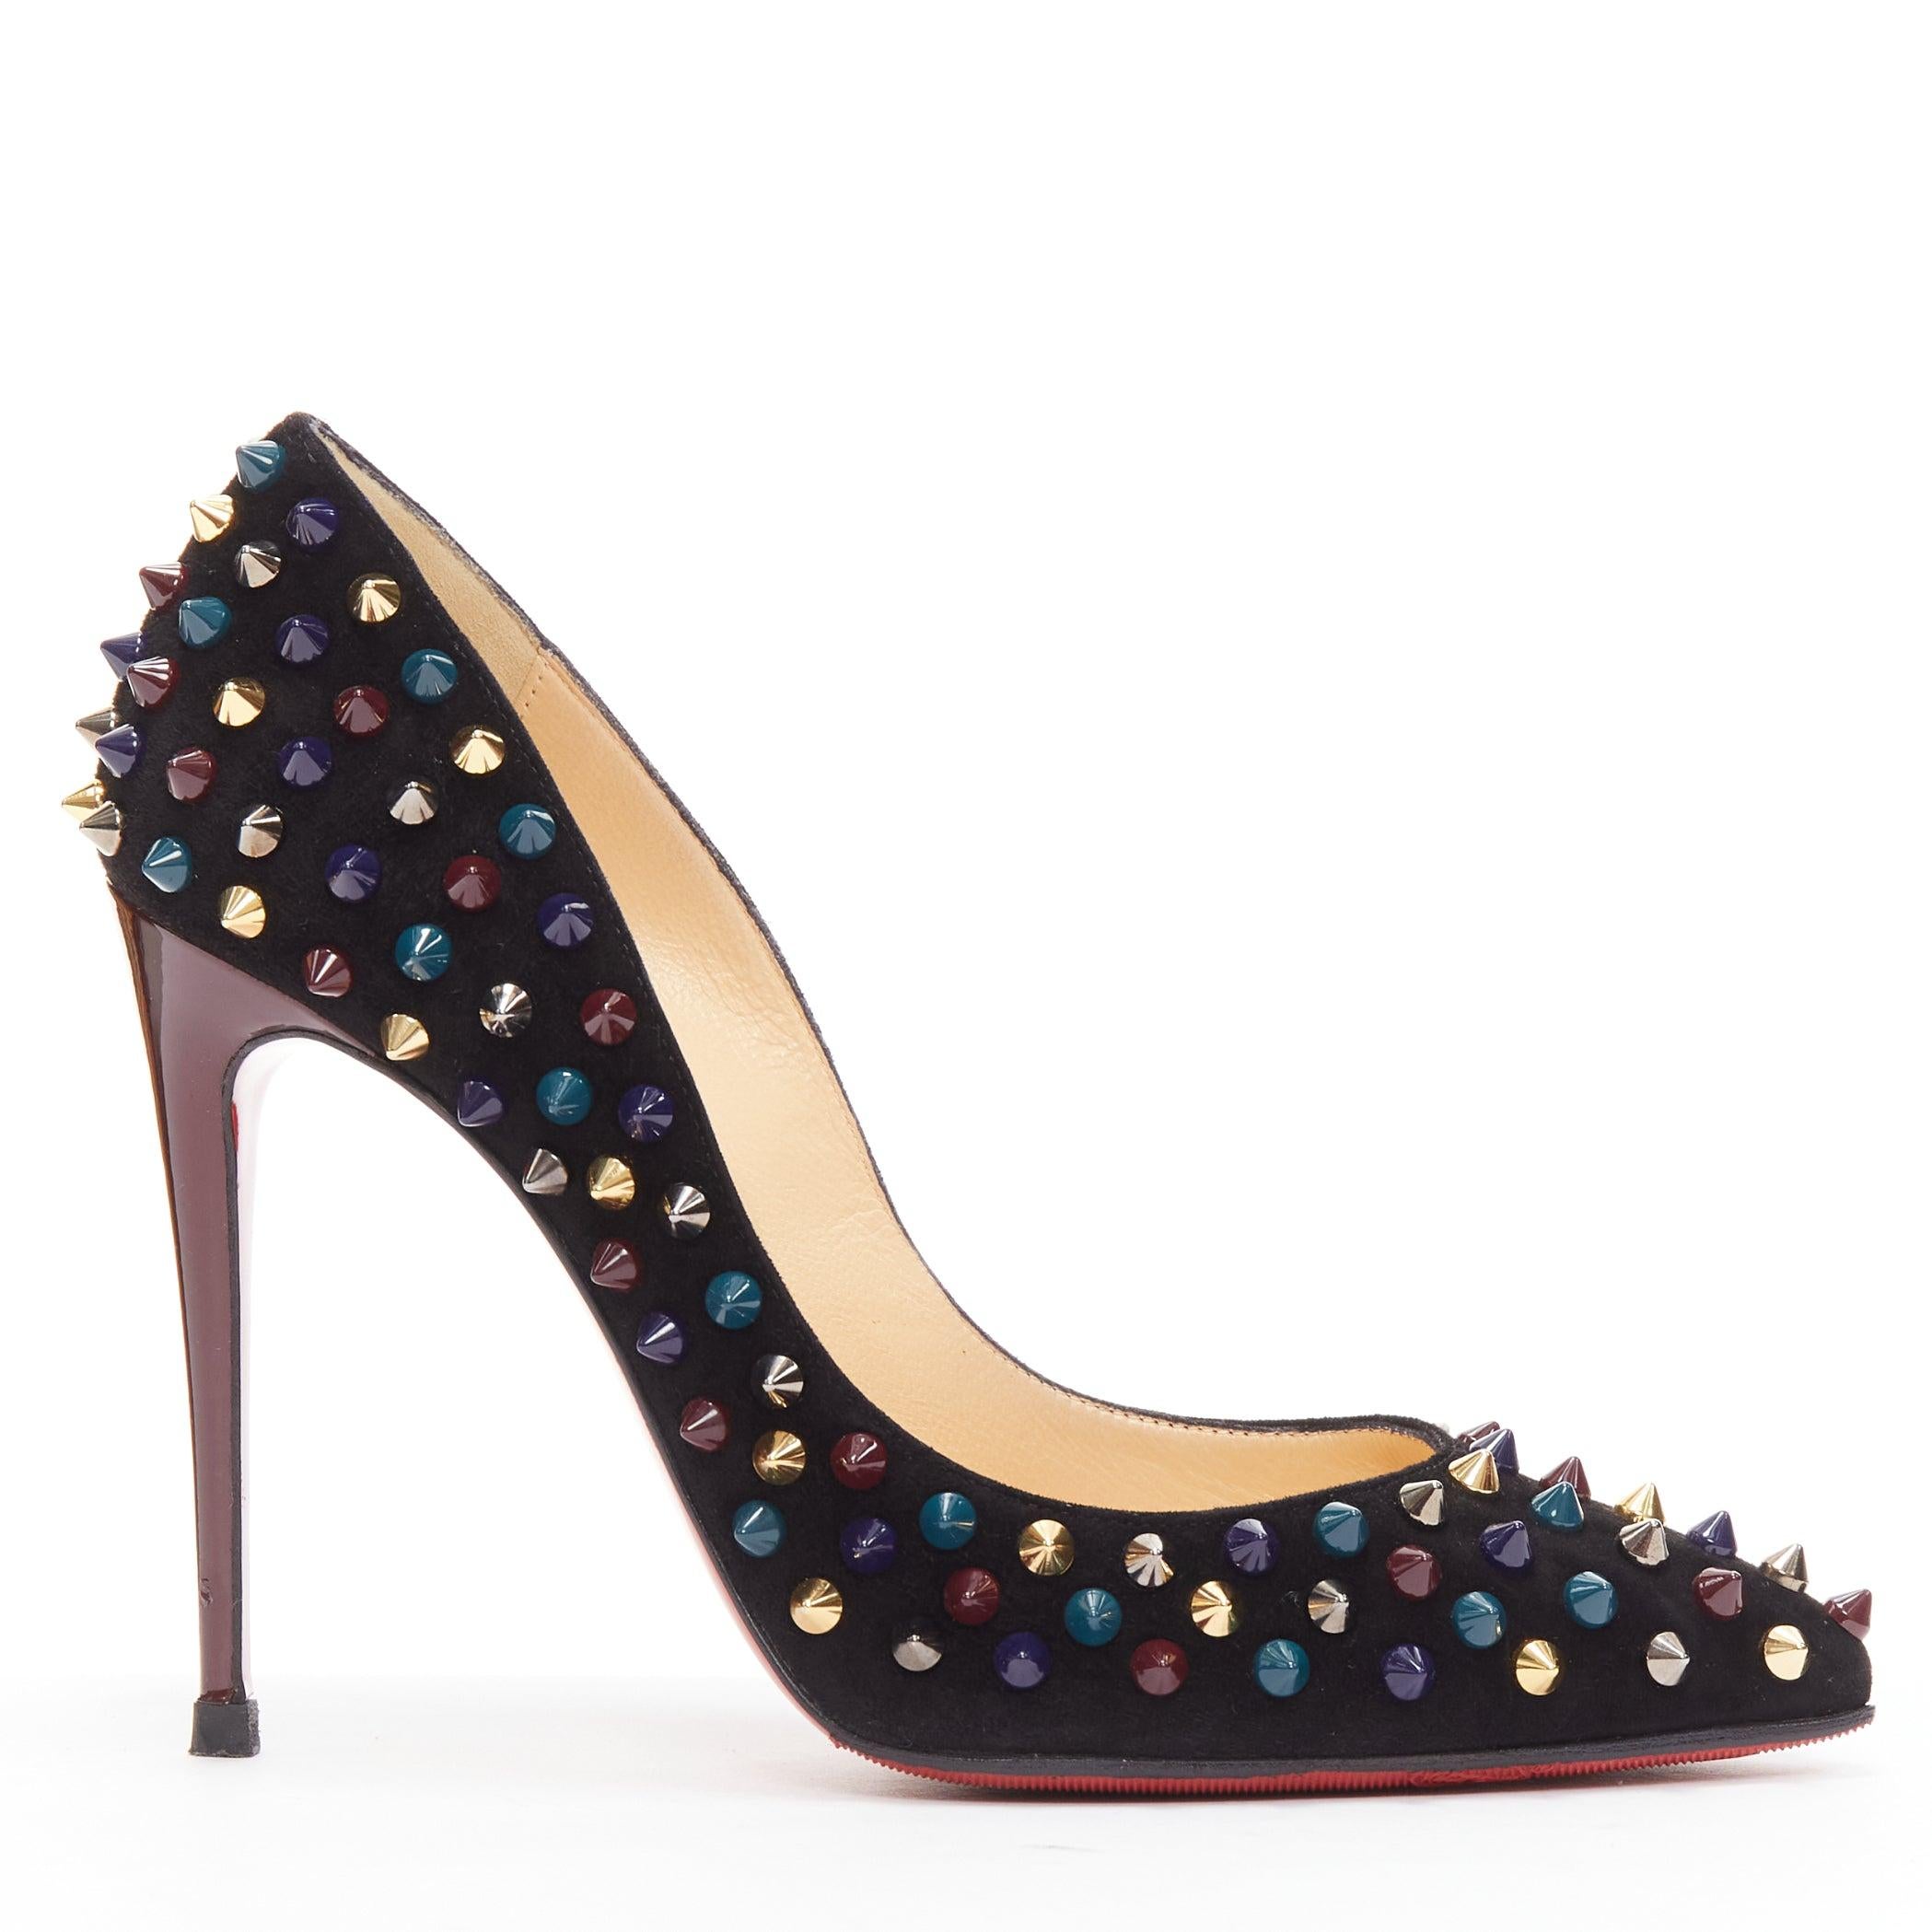 CHRISITAN LOUBOUTI Follies Spikes black suede jewely tone spike pigalle EU36
Reference: TGAS/D00957
Brand: Christian Louboutin
Model: Follies Spikes
Material: Suede
Color: Black, Multicolour
Pattern: Solid
Lining: Brown Leather
Extra Details: Black